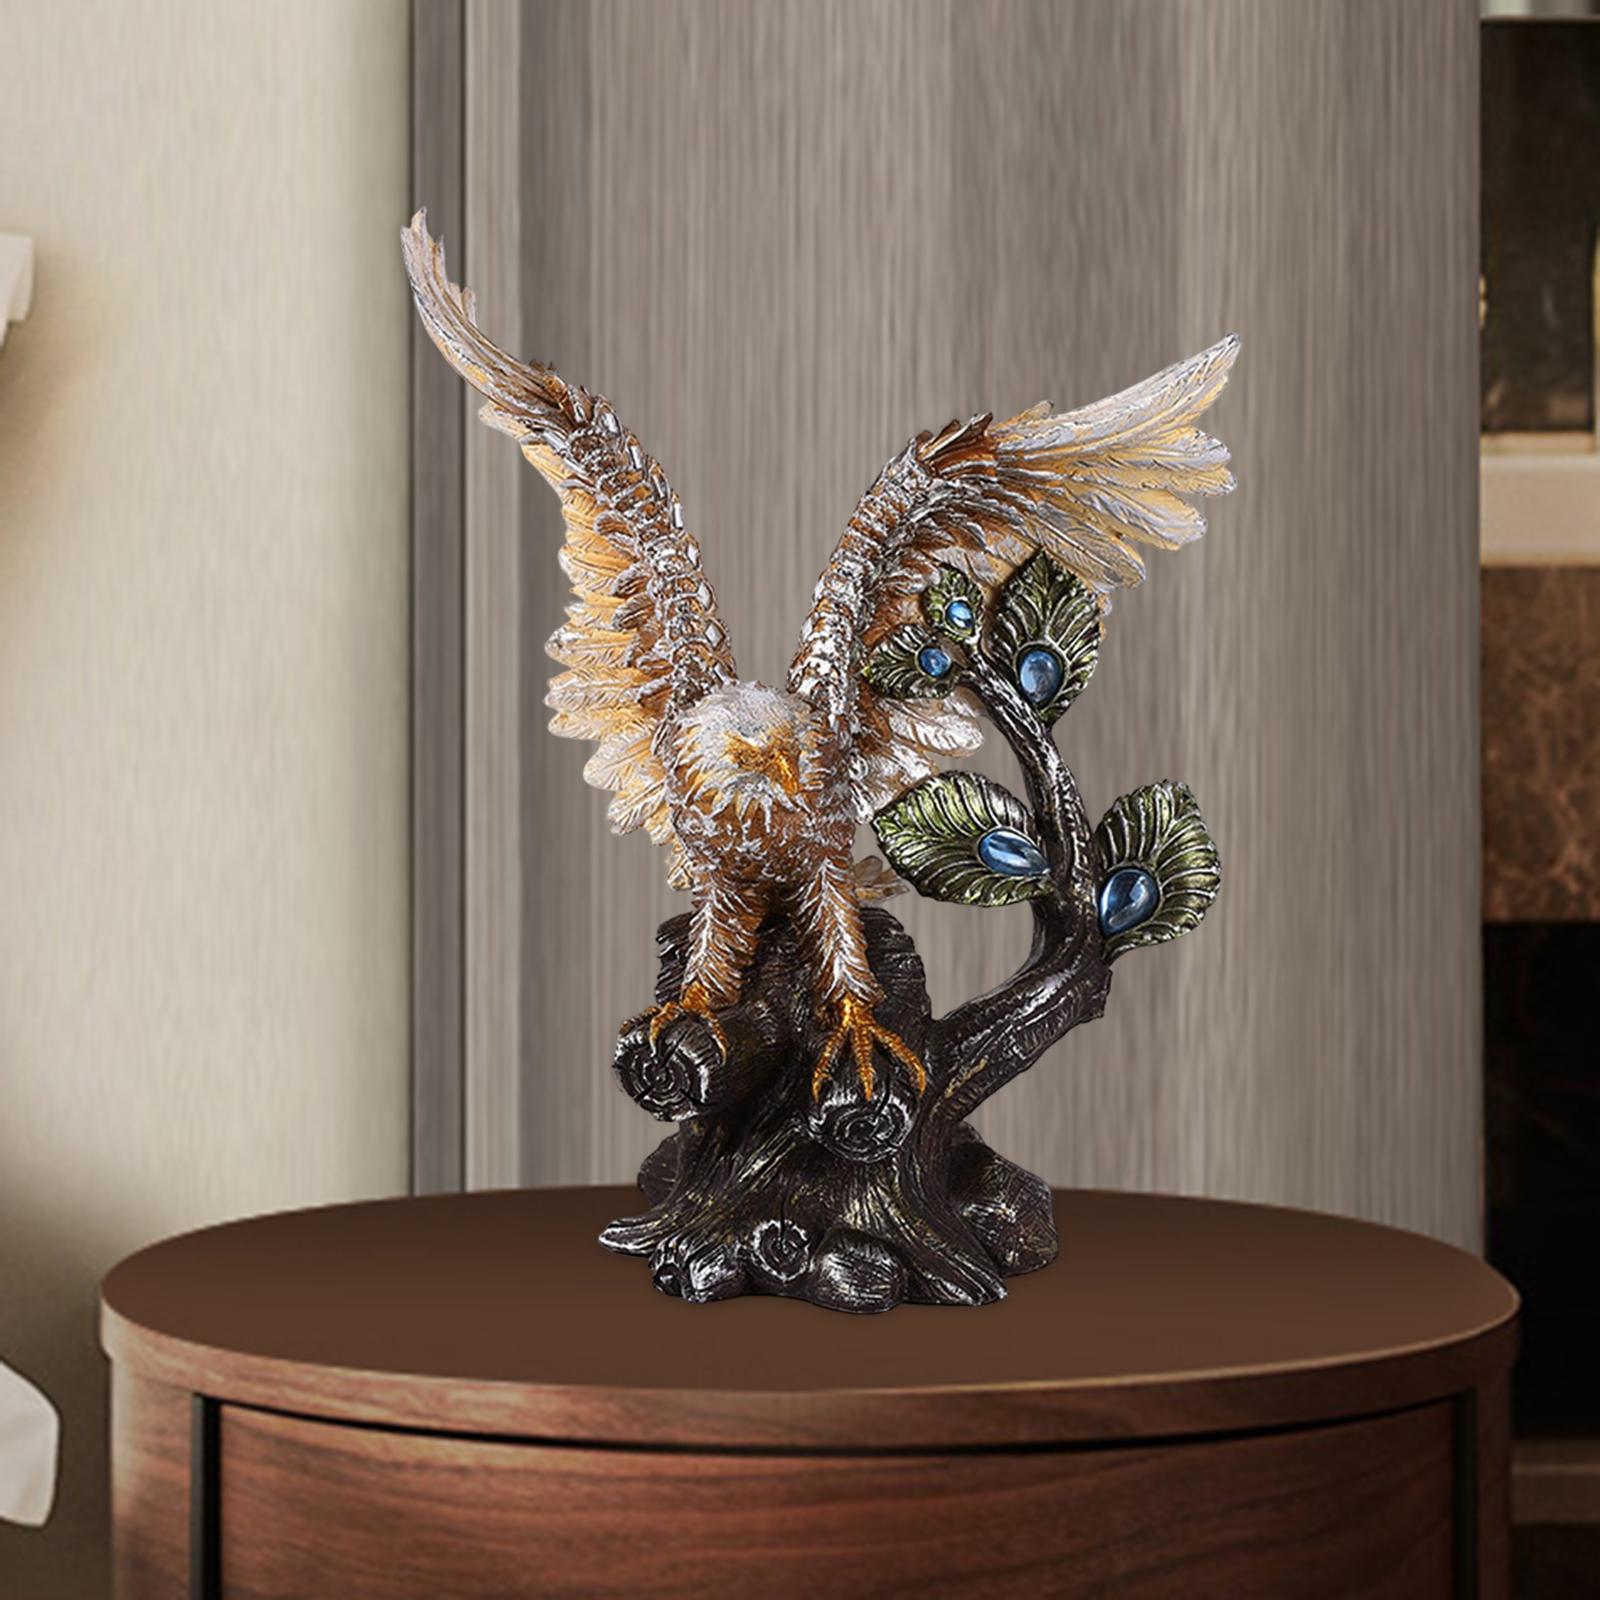 Eagle Sculpture Decorative Collection for Drawing Room Tabletop Studio Style A